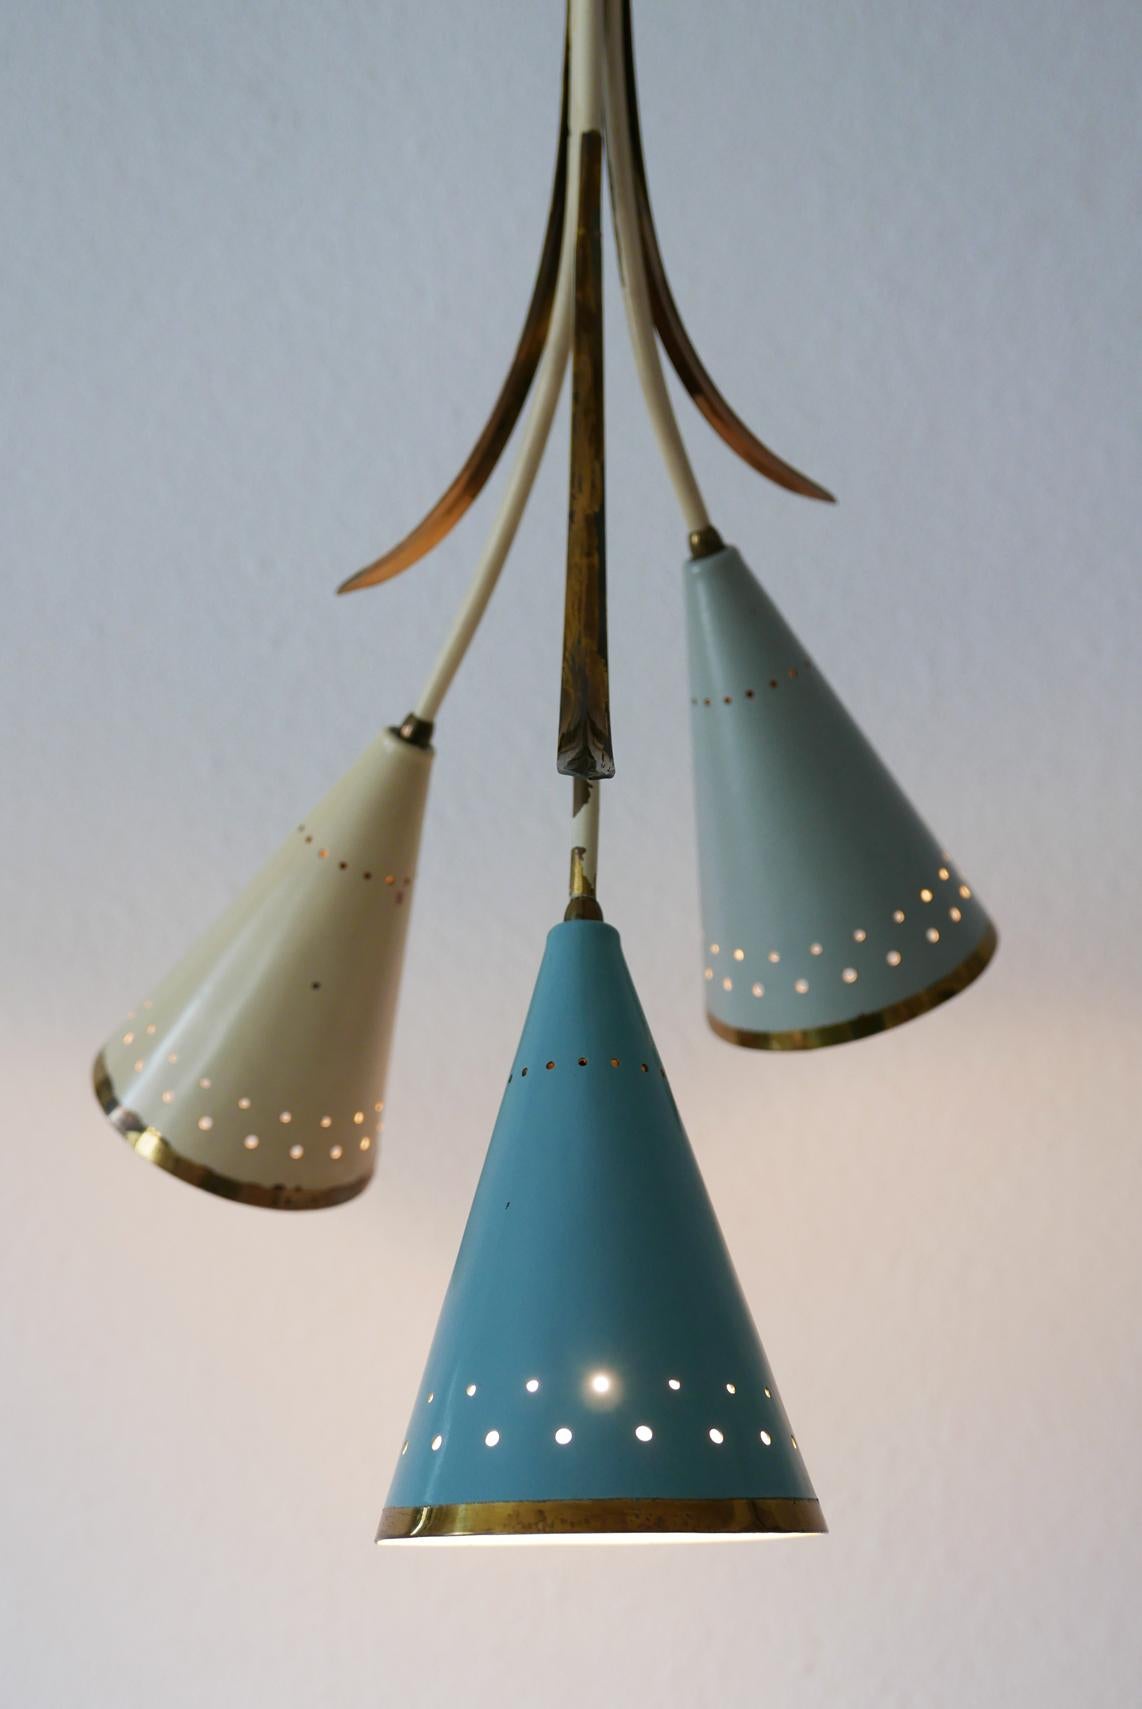 Exceptional Mid-Century Modern three-armed Sputnik chandelier or pendant lamp in lovely colors. Manufactured probably in 1950s in Germany.

Executed in brass sheet and tubes. The perforated brass lamp shades are in light green, blue and beige